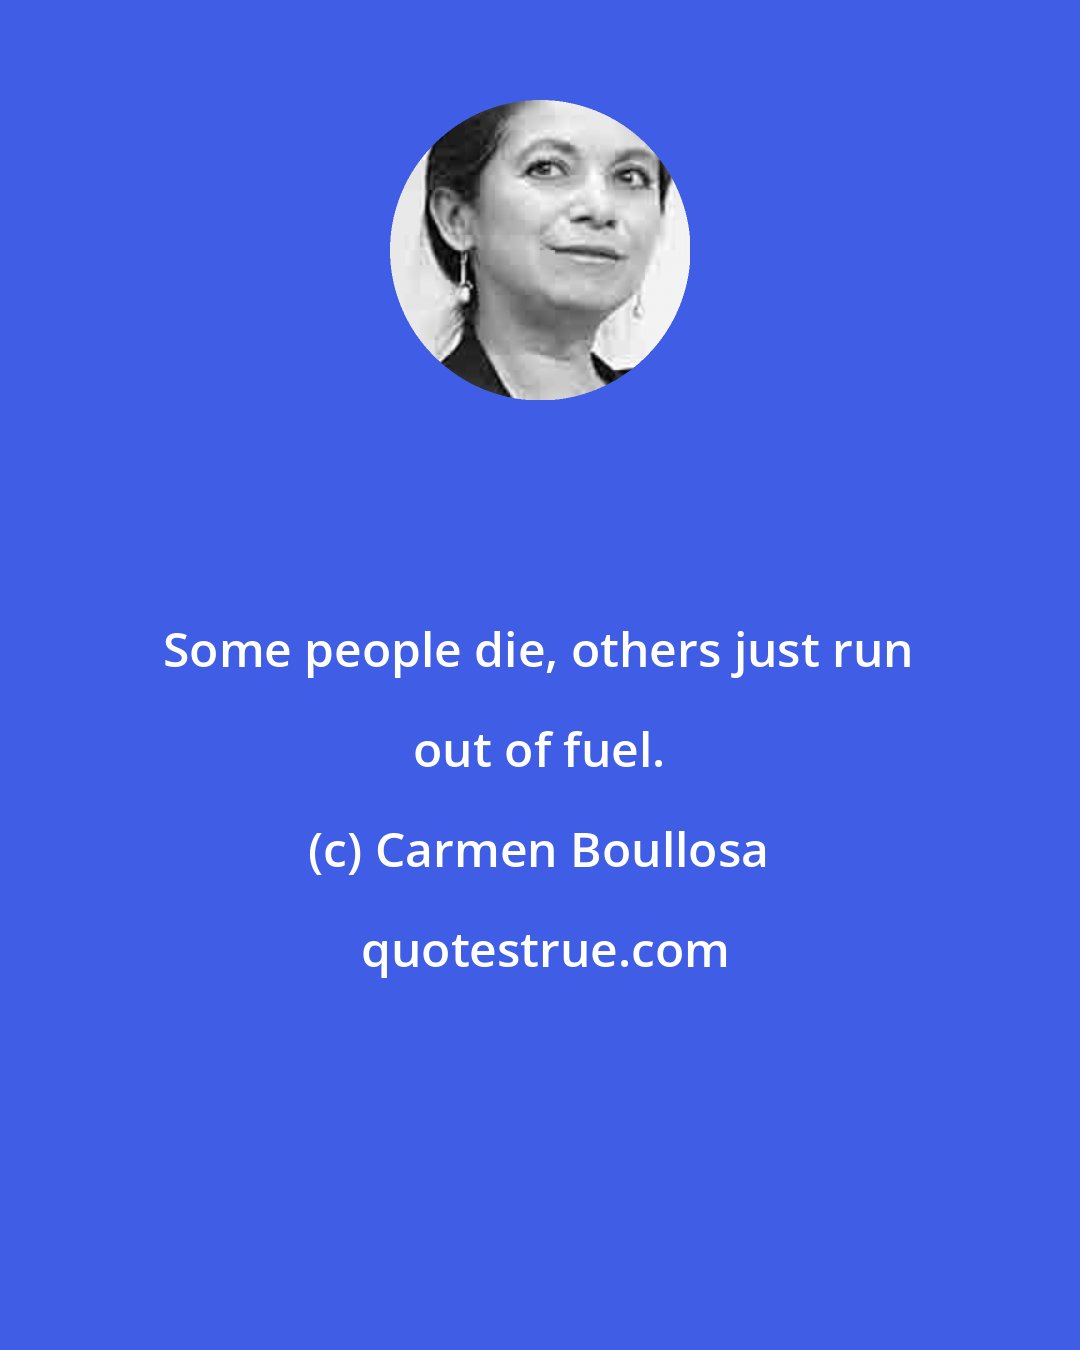 Carmen Boullosa: Some people die, others just run out of fuel.